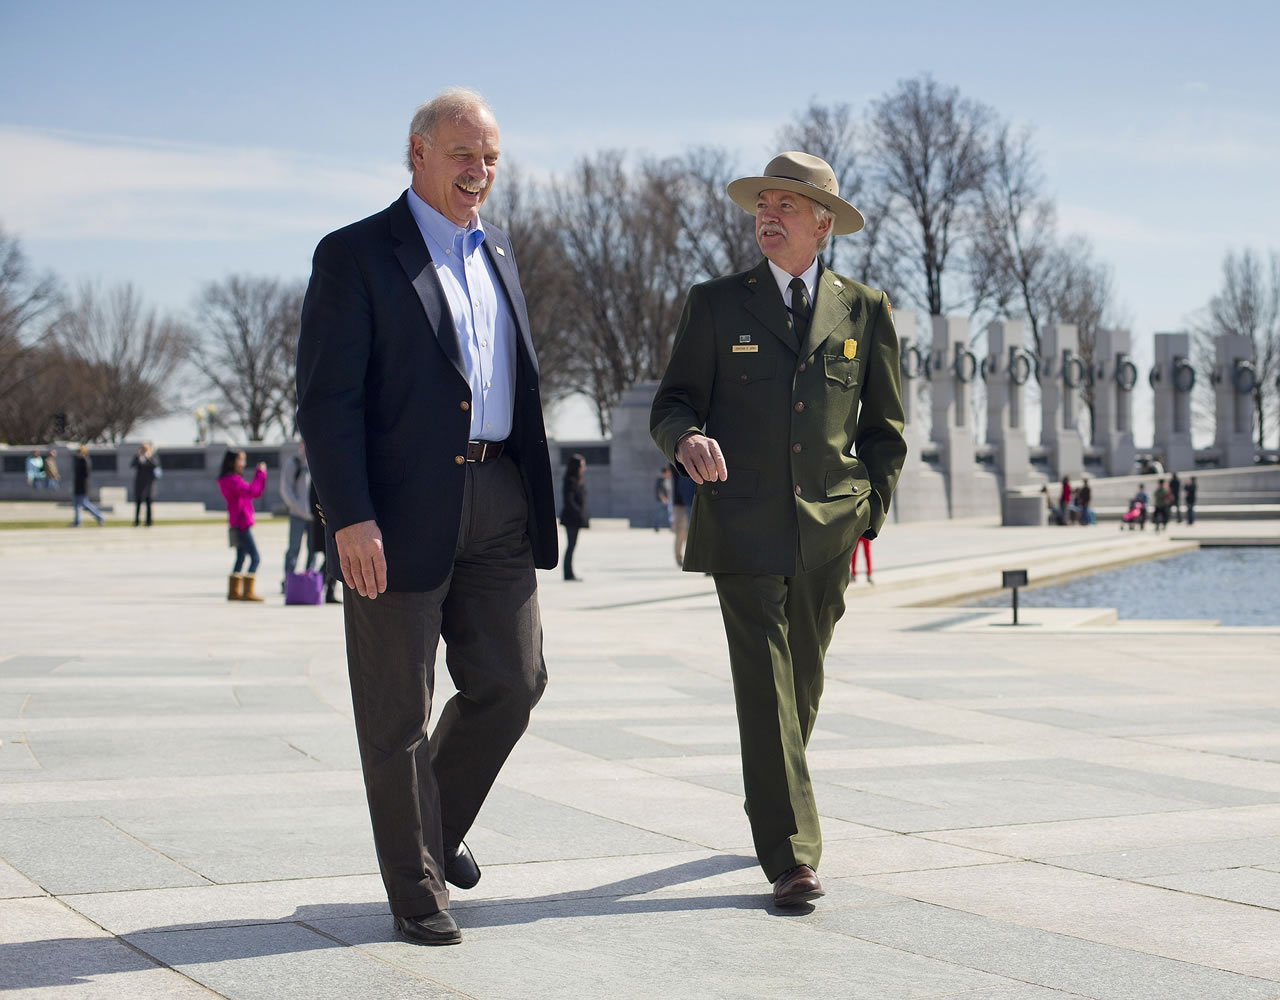 National Park Service Director Jonathan Jarvis, right, and the head of the National Park Foundation Dan Wenk walk at the World War II Memorial on the National Mall in Washington.